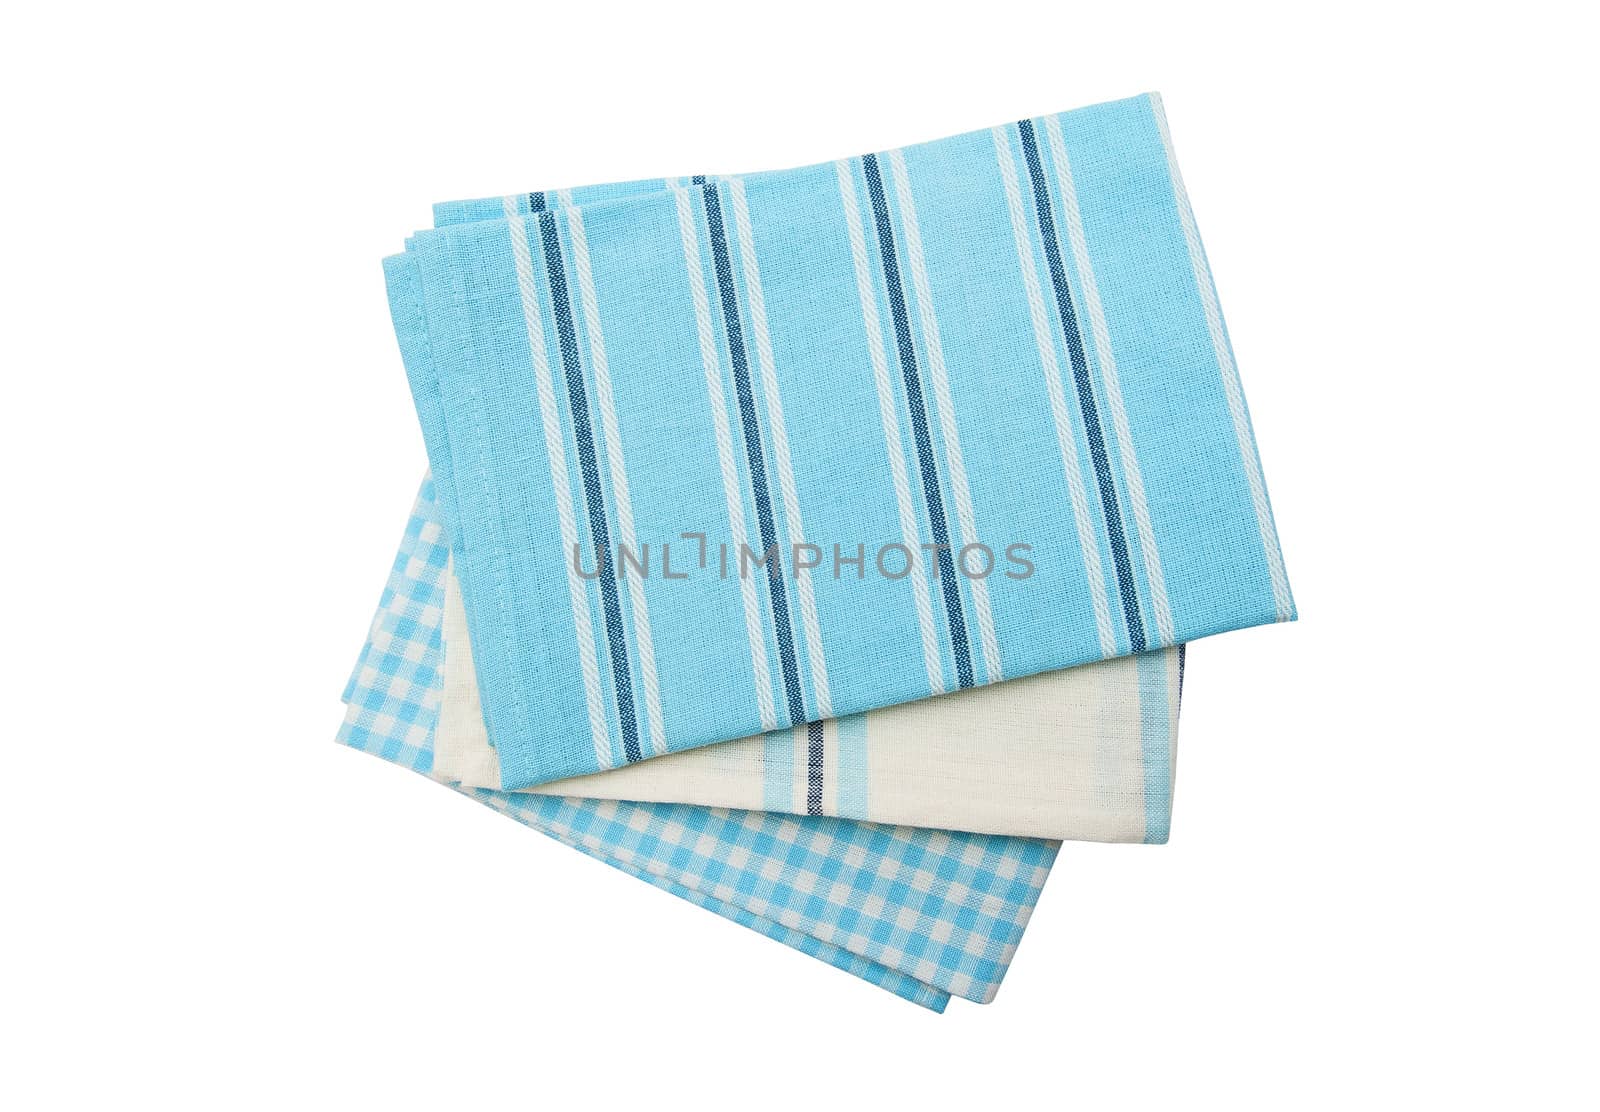 Dish towels isolated on the white background